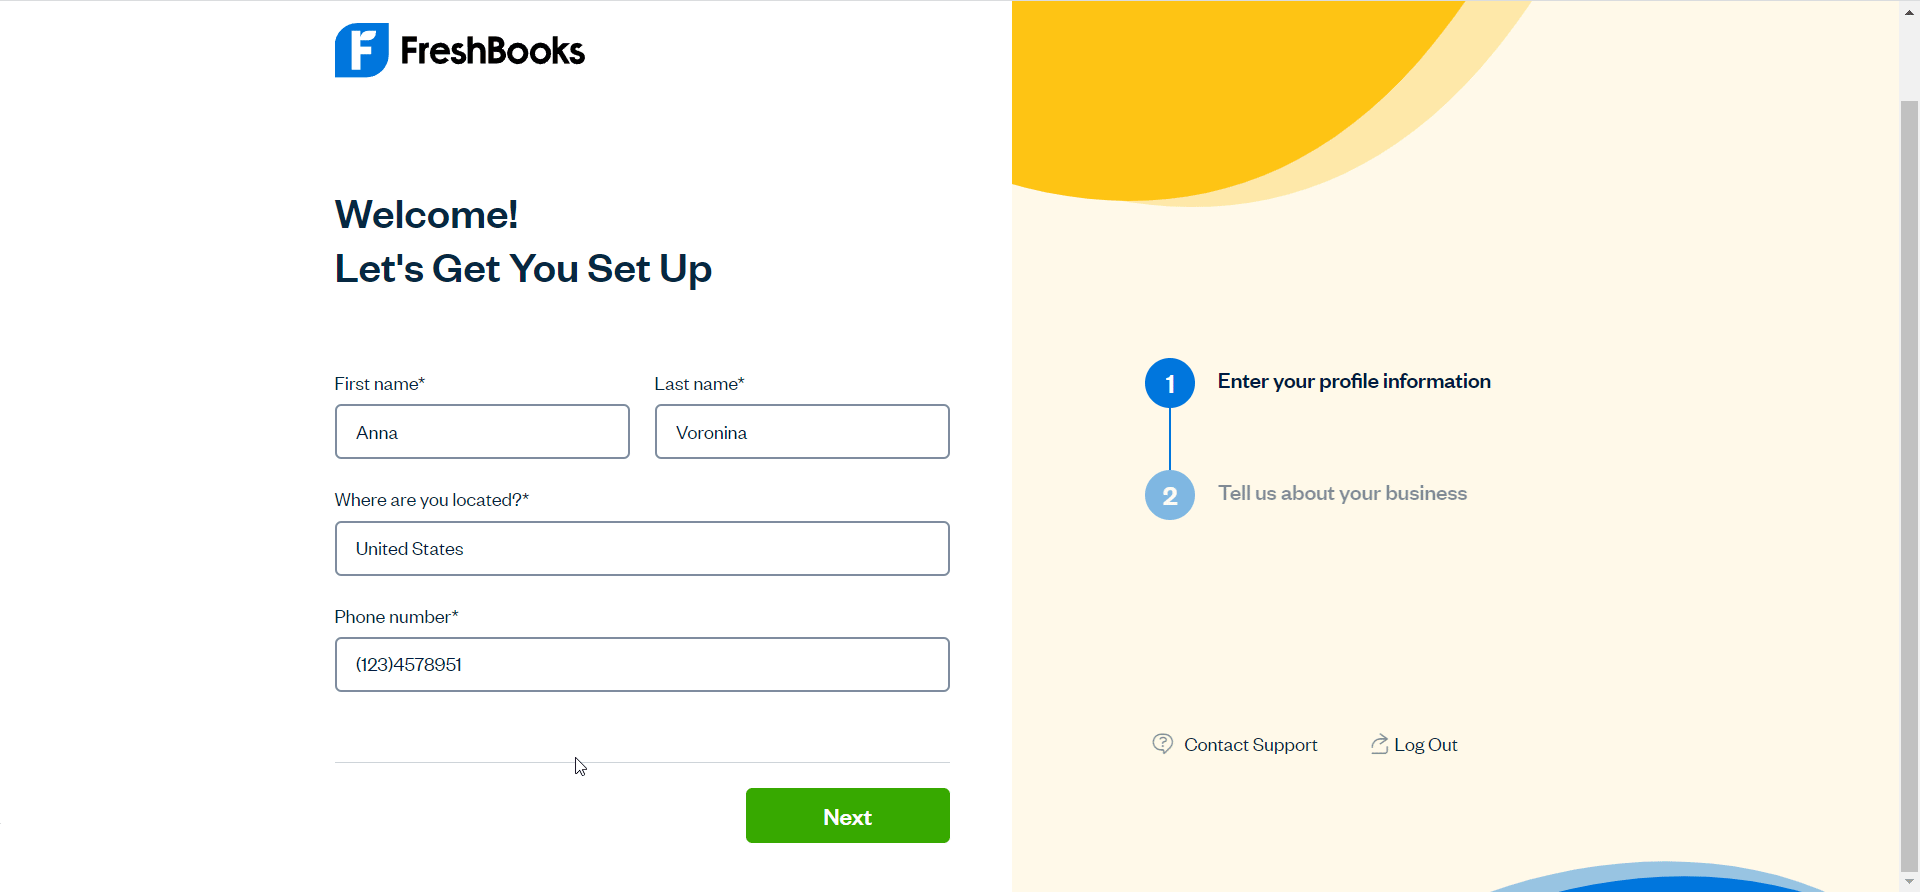 freshbooks onboarding survey questions